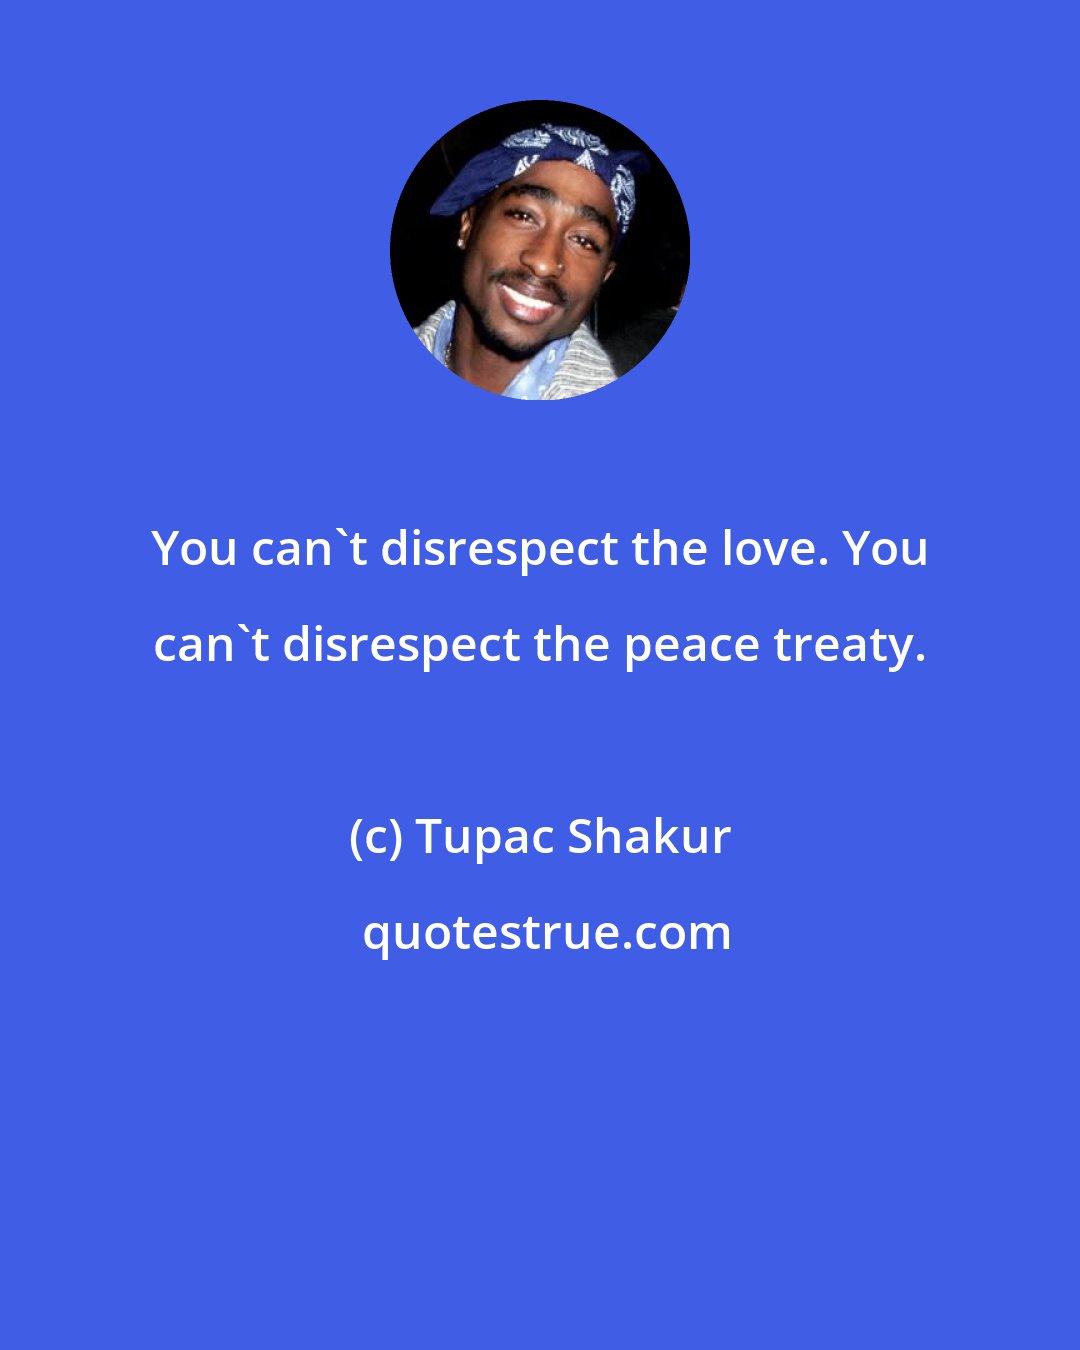 Tupac Shakur: You can't disrespect the love. You can't disrespect the peace treaty.